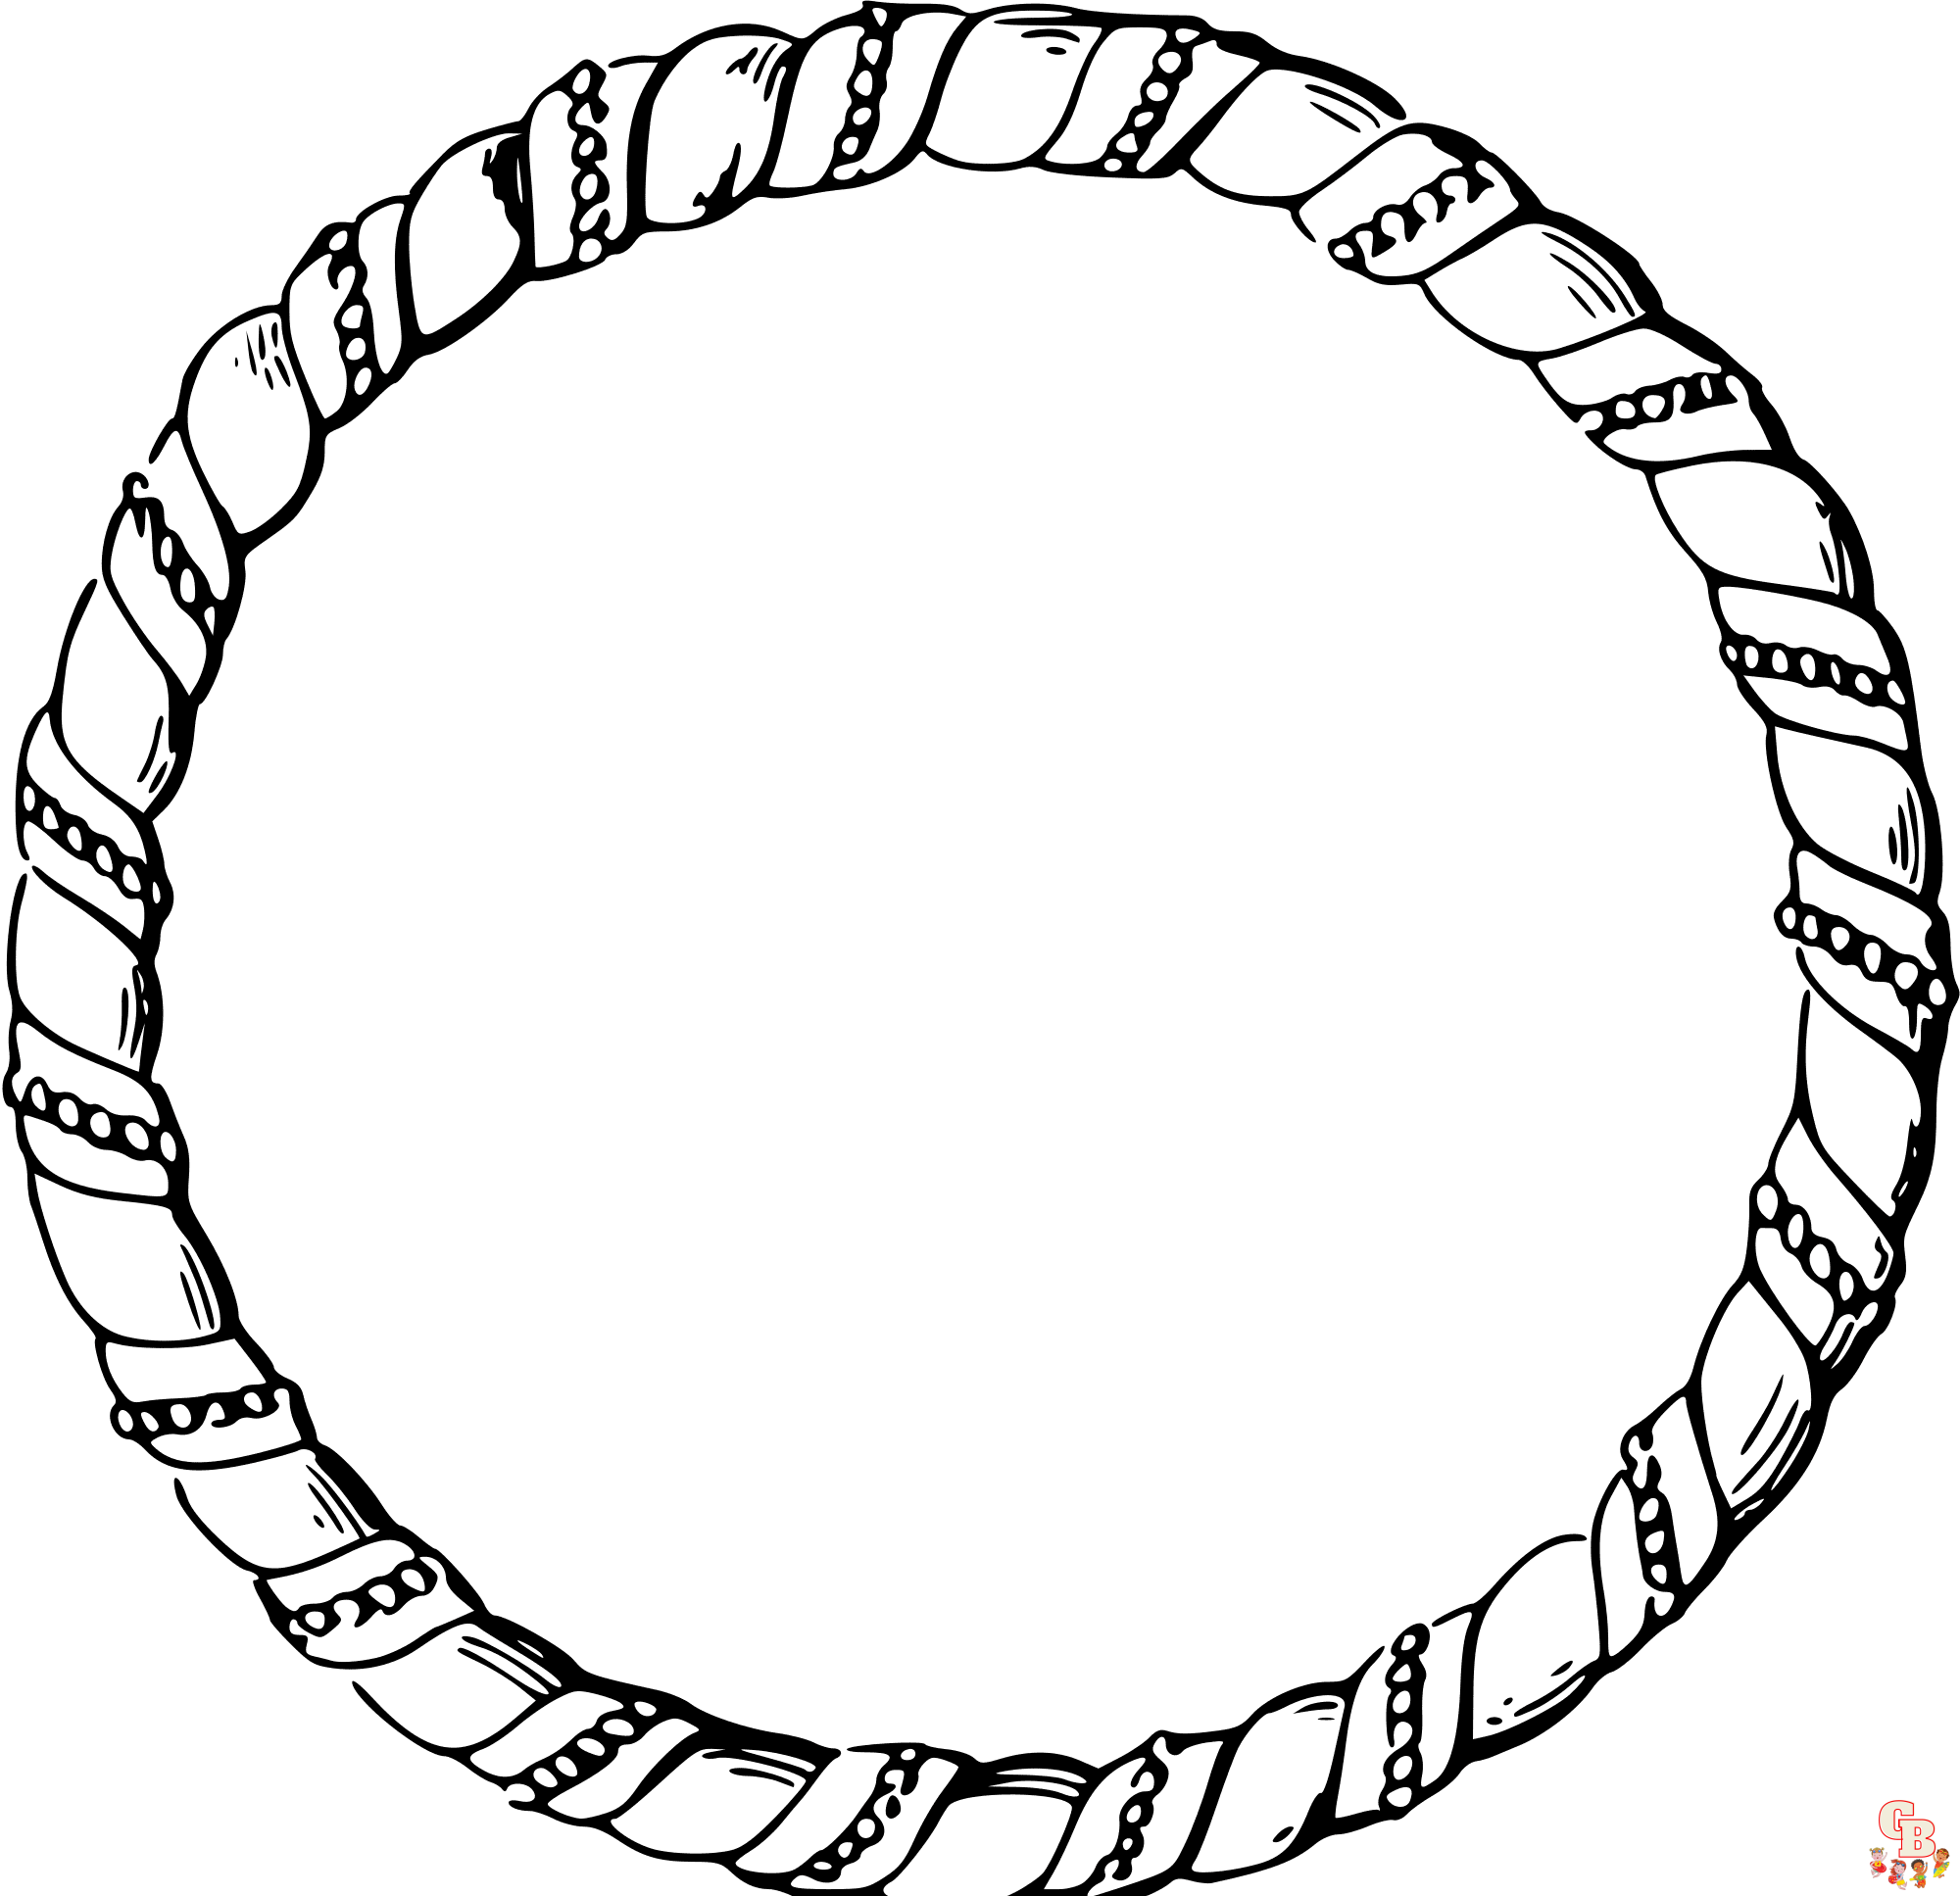 Free Bracelet coloring pages for kids